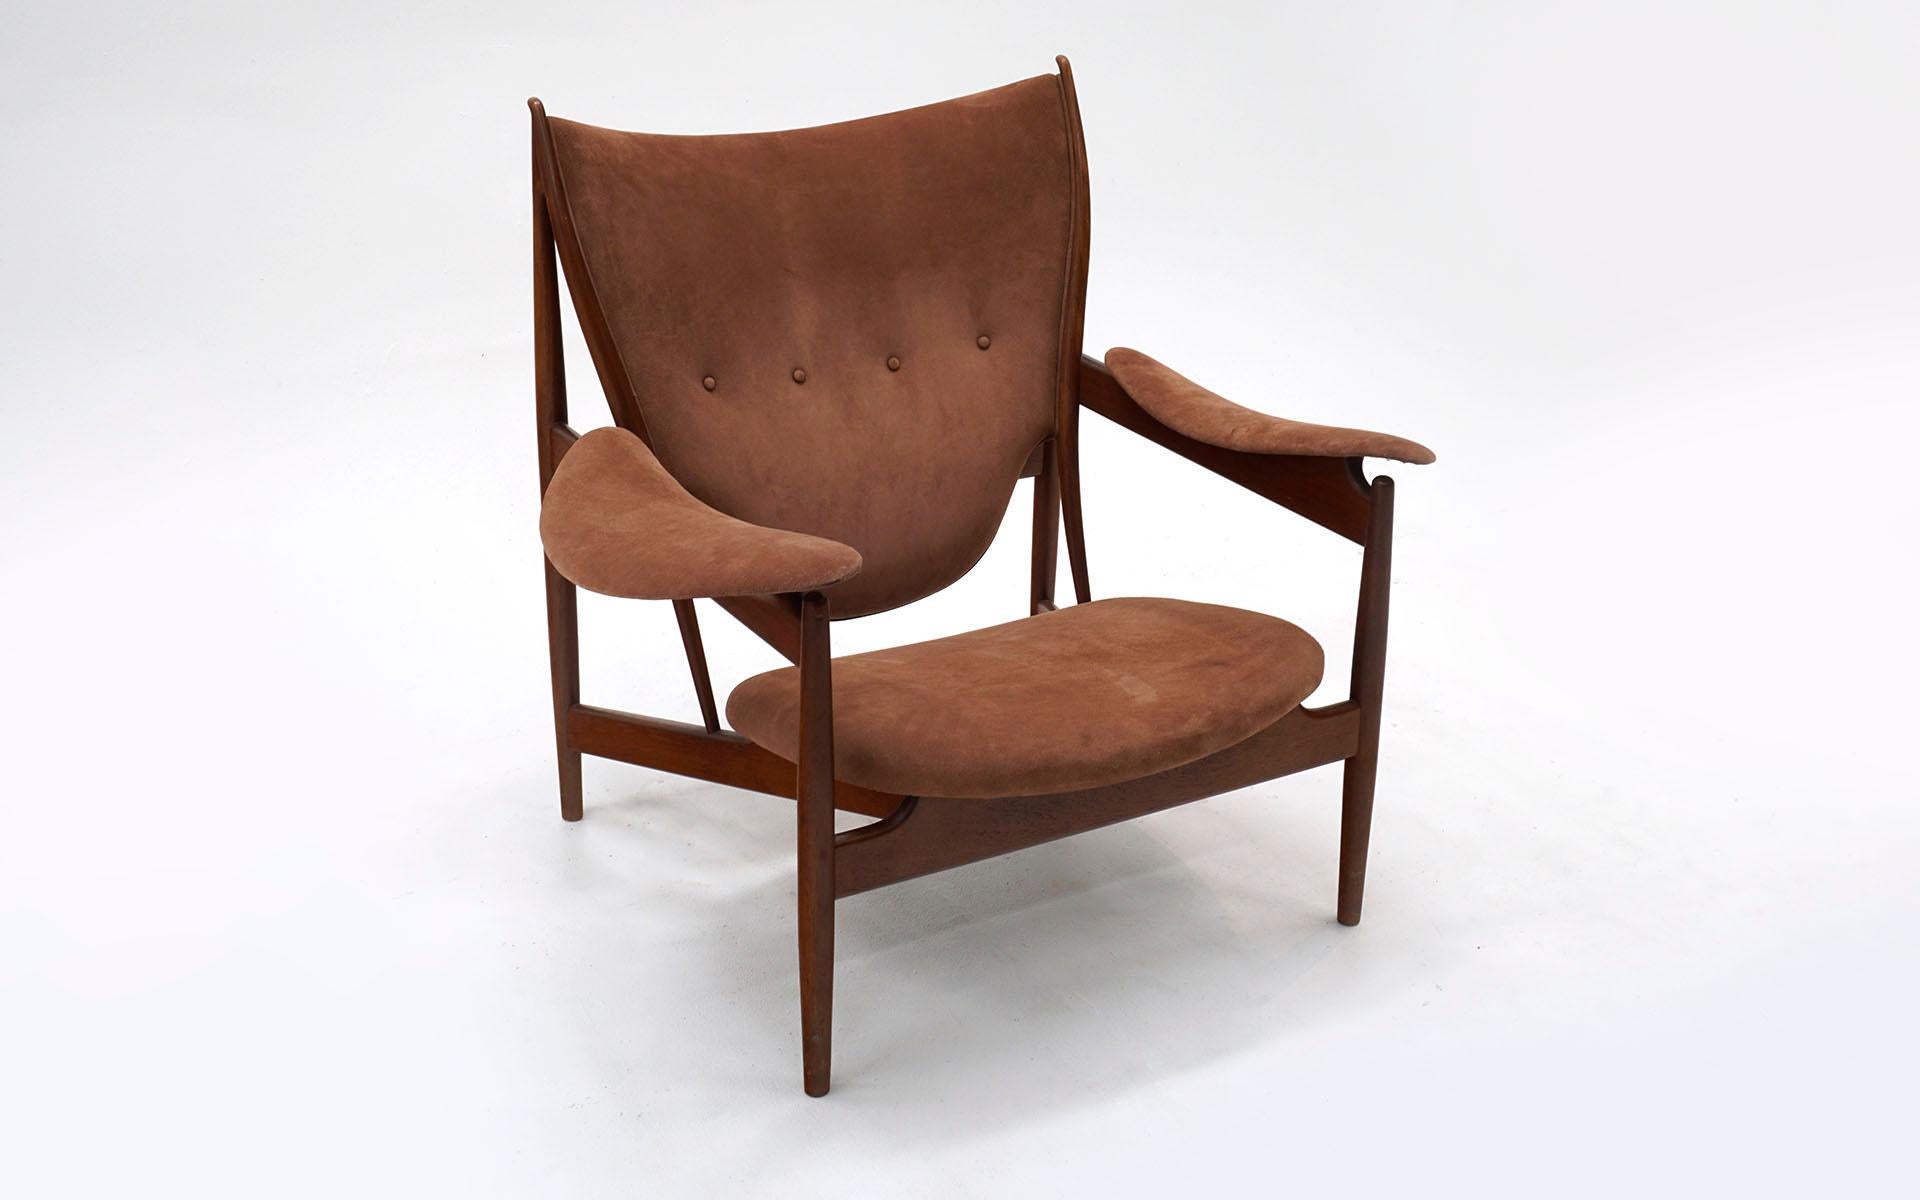 Scandinavian Modern Early Chieftain Chair by Finn Juhl for Niels Vodder Teak and Suede, Signed